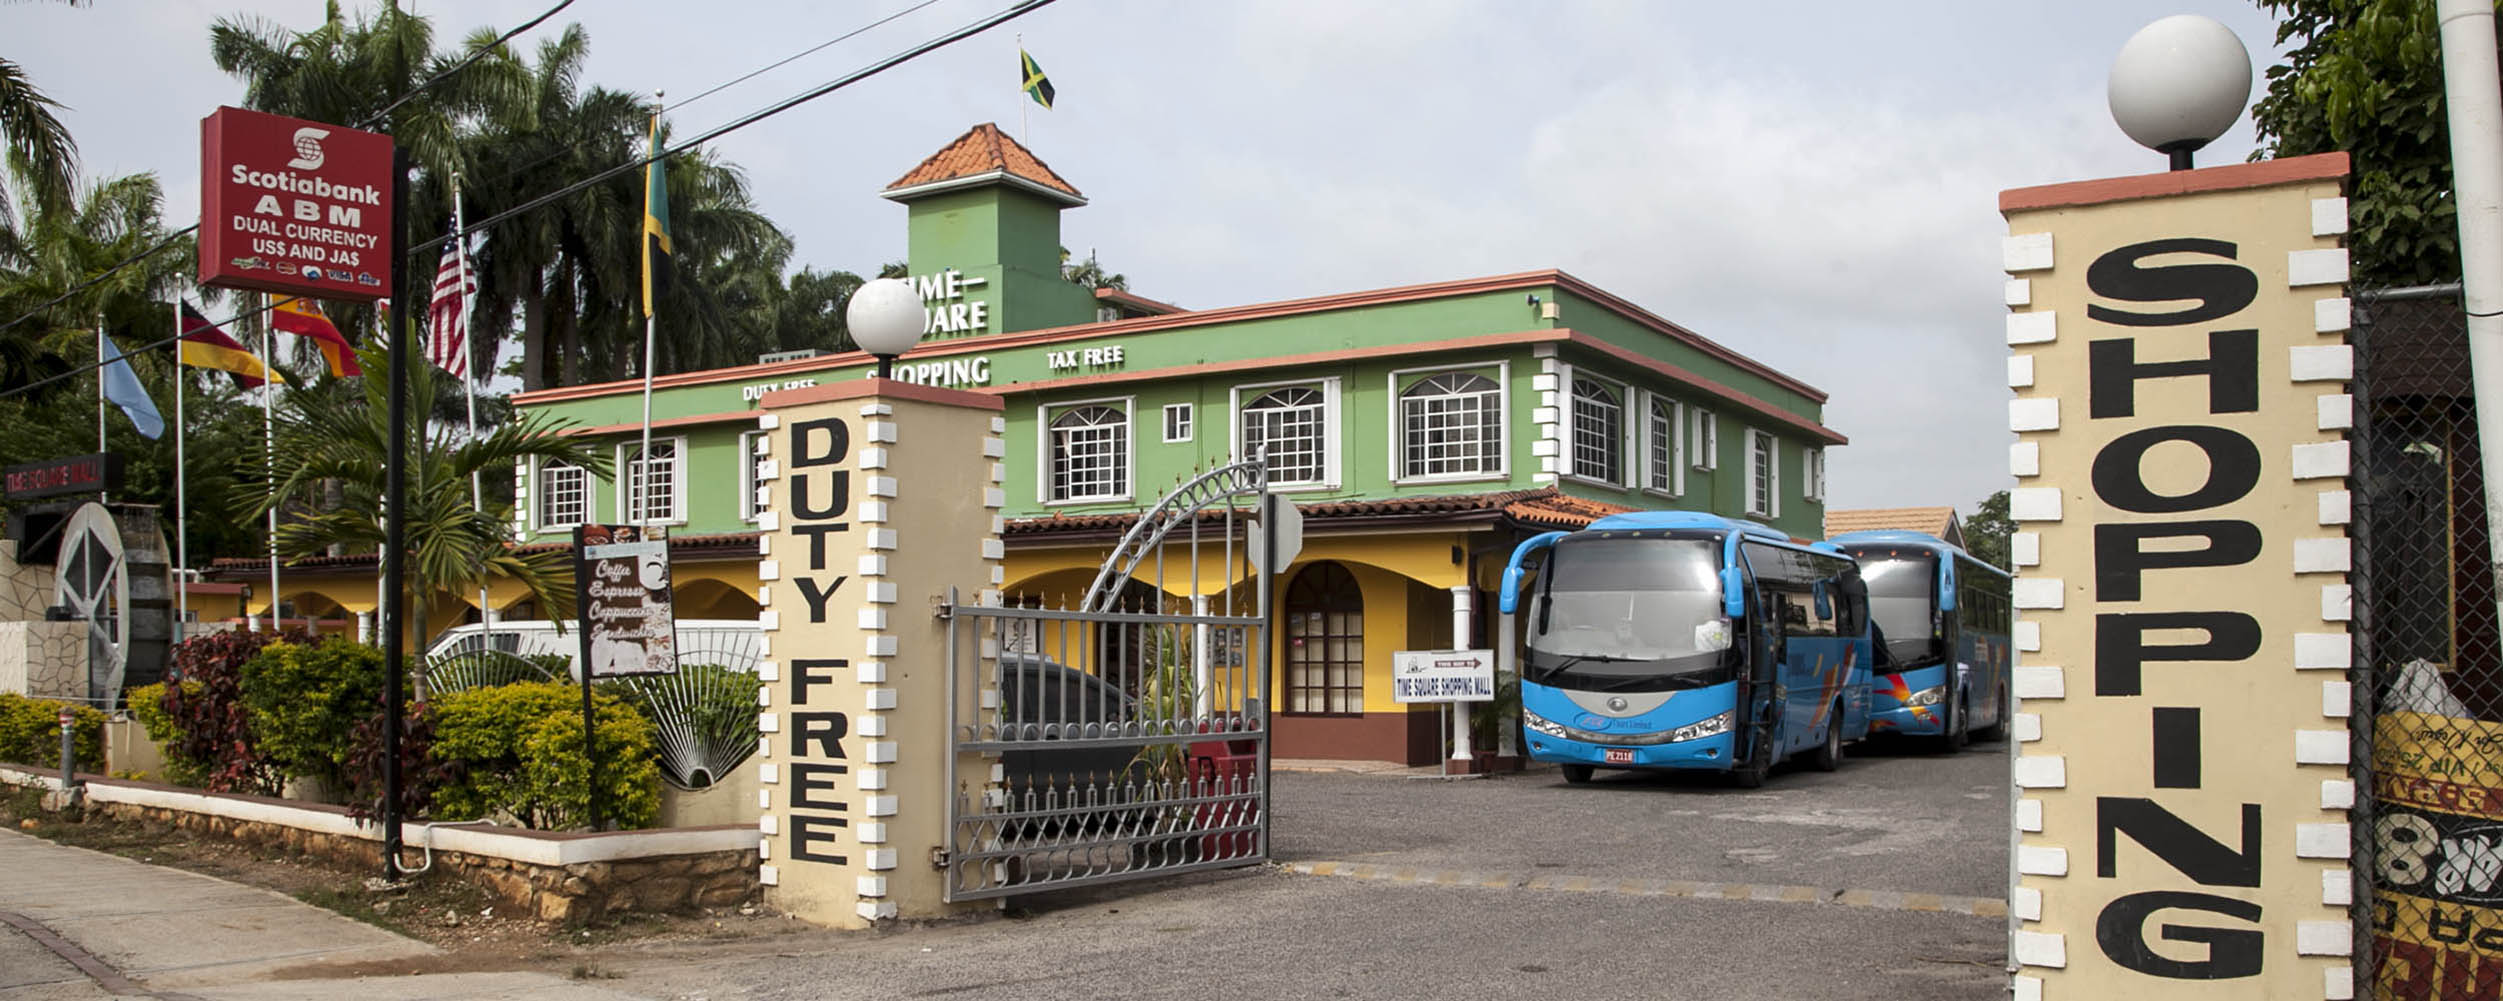 Time Square Duty Free Shopping, Norman Manley Boulevard - Negril Jamaica